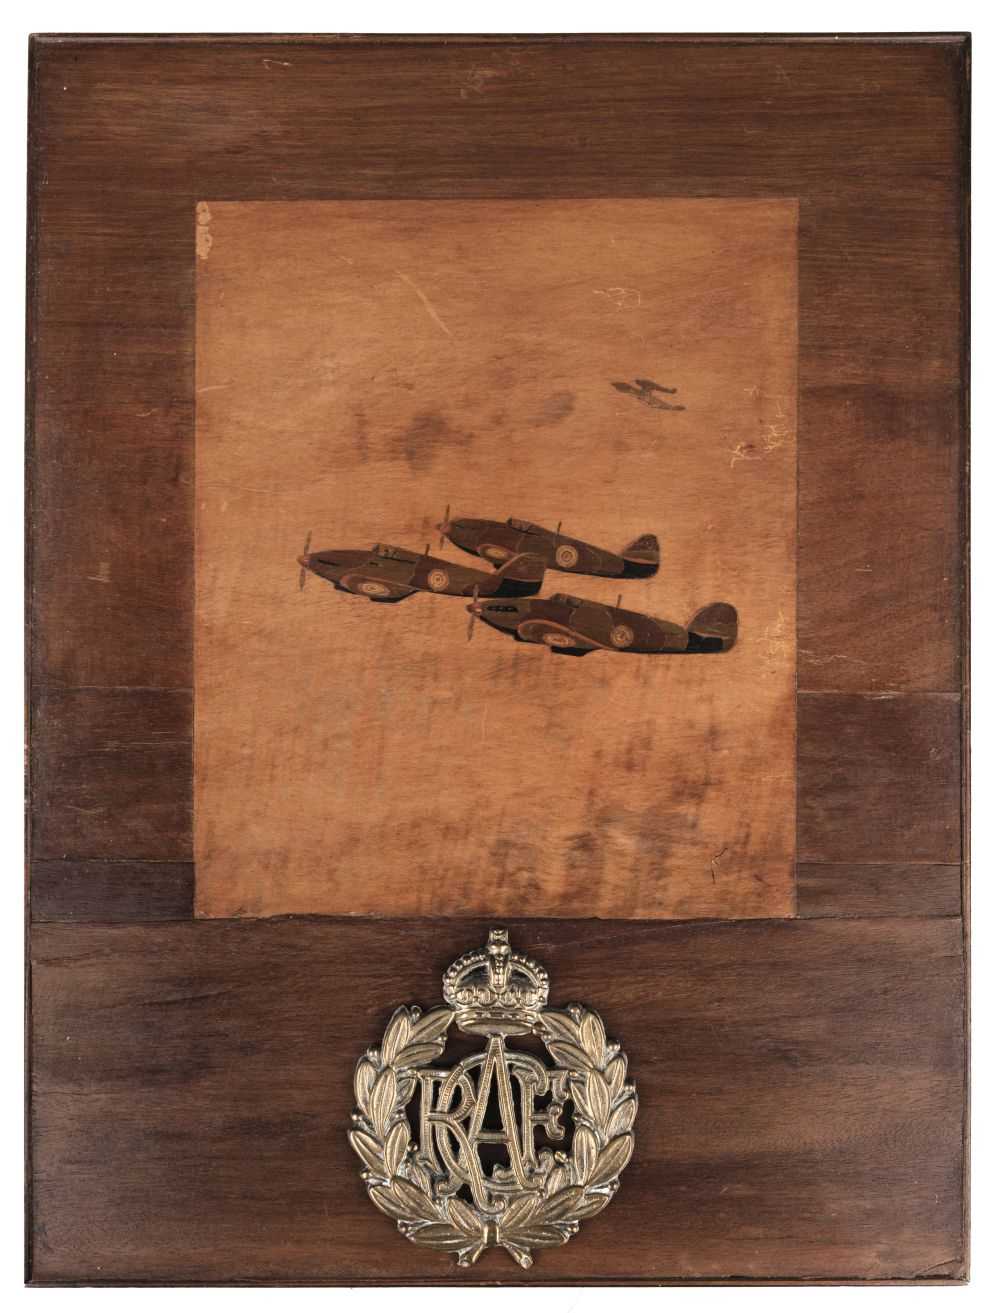 Lot 230 - Royal Canadian Air Force. WWII RCAF Hawker Hurricanes wall-hanging artwork, circa 1940s